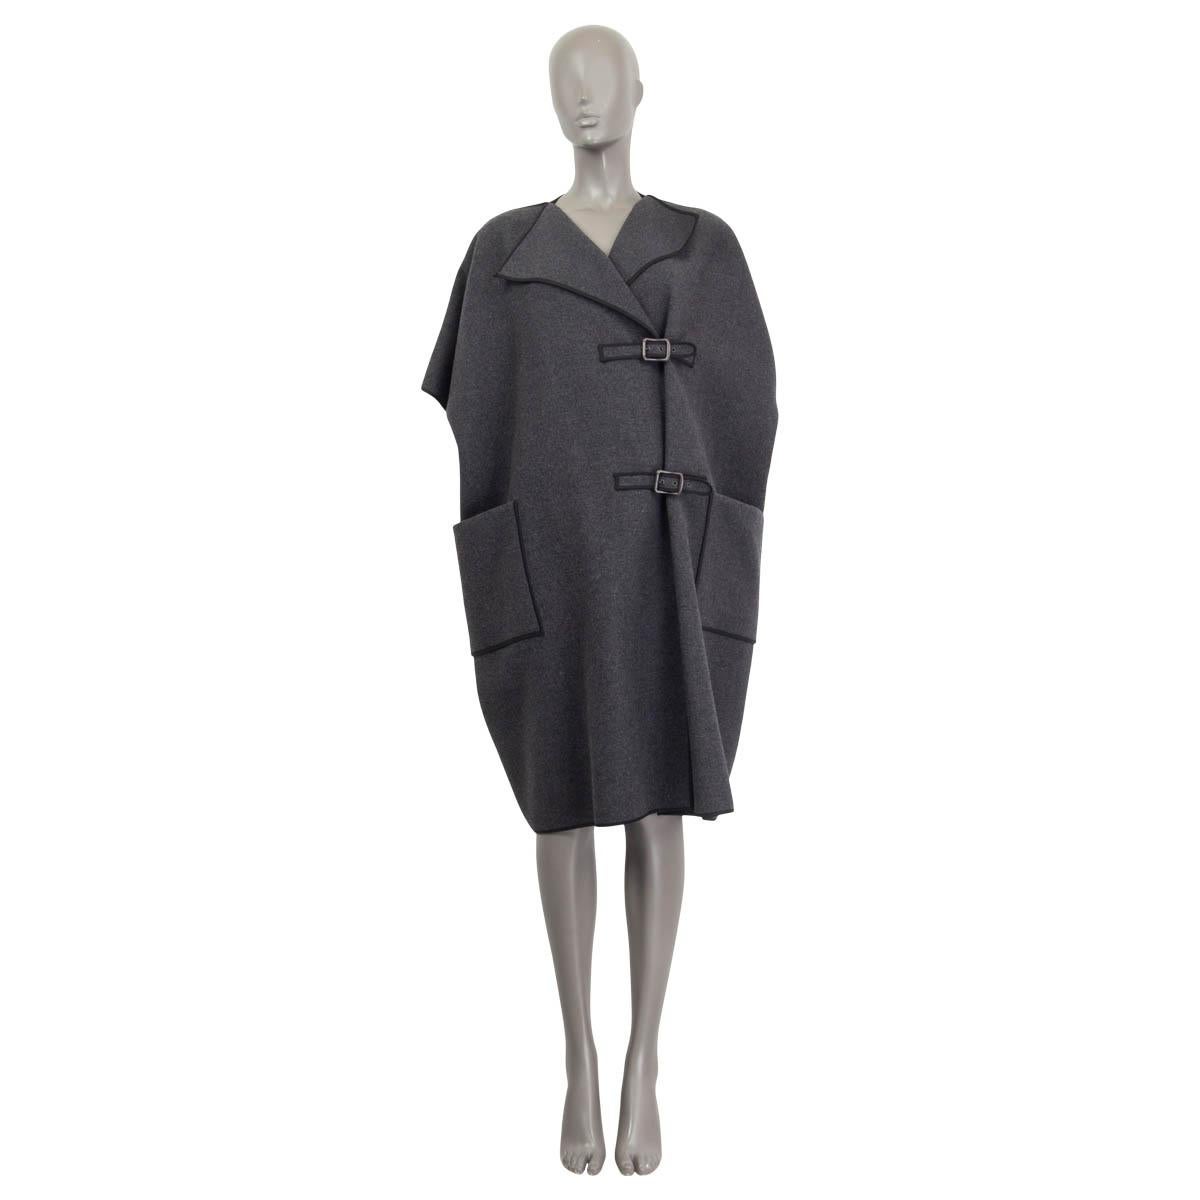 100% authentic Bottega Veneta cape in gray wool (80%) and angora (20%) with black cotton details at the sleeves,collar and hemline. Features short raglan sleeves (sleeve measurements taken from the neck) and two front patch pockets. Closes on the